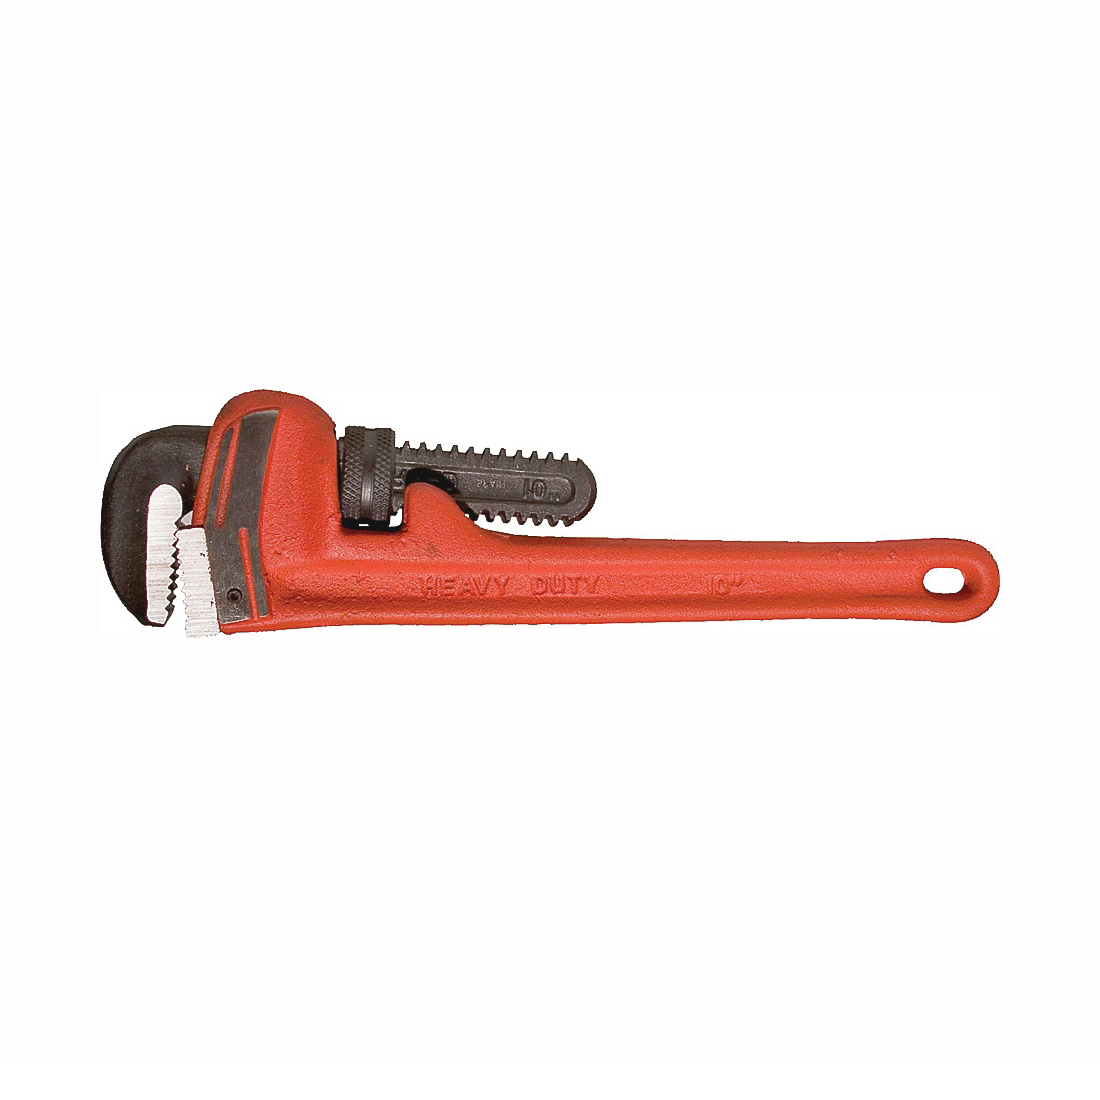 PRO-LINE Series 02810 Pipe Wrench, 1-1/2 in Jaw, 10 in L, Straight Jaw, Iron, Epoxy-Coated